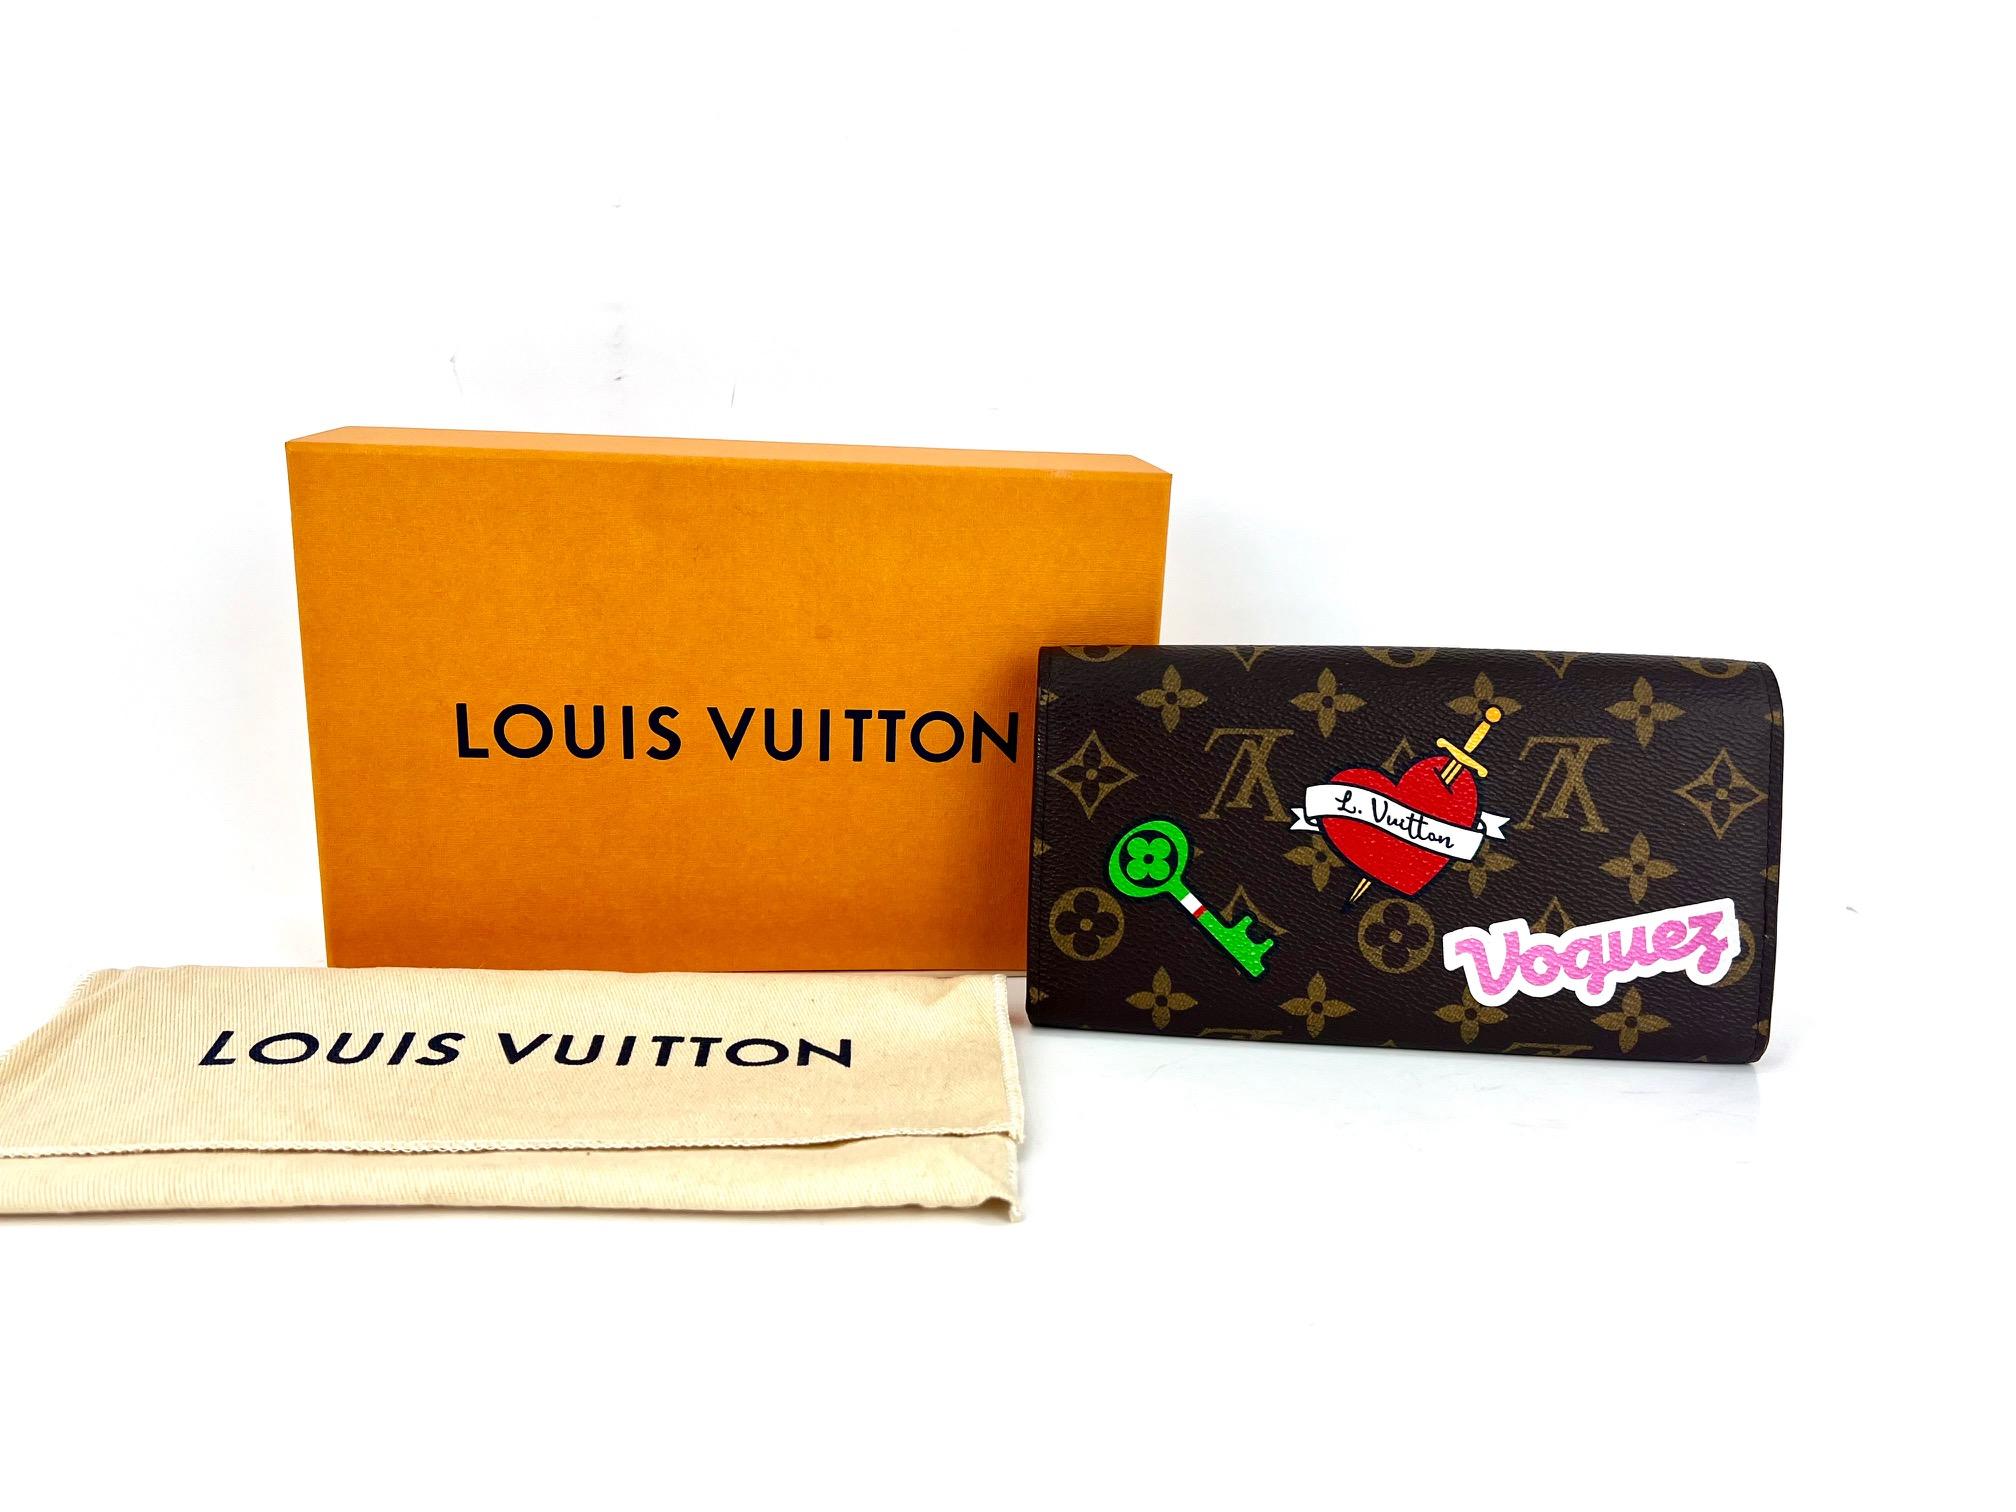 Preowned 100% Authentic
LOUIS VUITTON Sarah My World Tour 
Portefeiulle Monogram Wallet Added 
Chain to use as a Crossbody
RATING: A/B...Very Good, well maintained,
shows minor signs of wear
MATERIAL: monogram canvas, leather 
STRAP: non LV golden